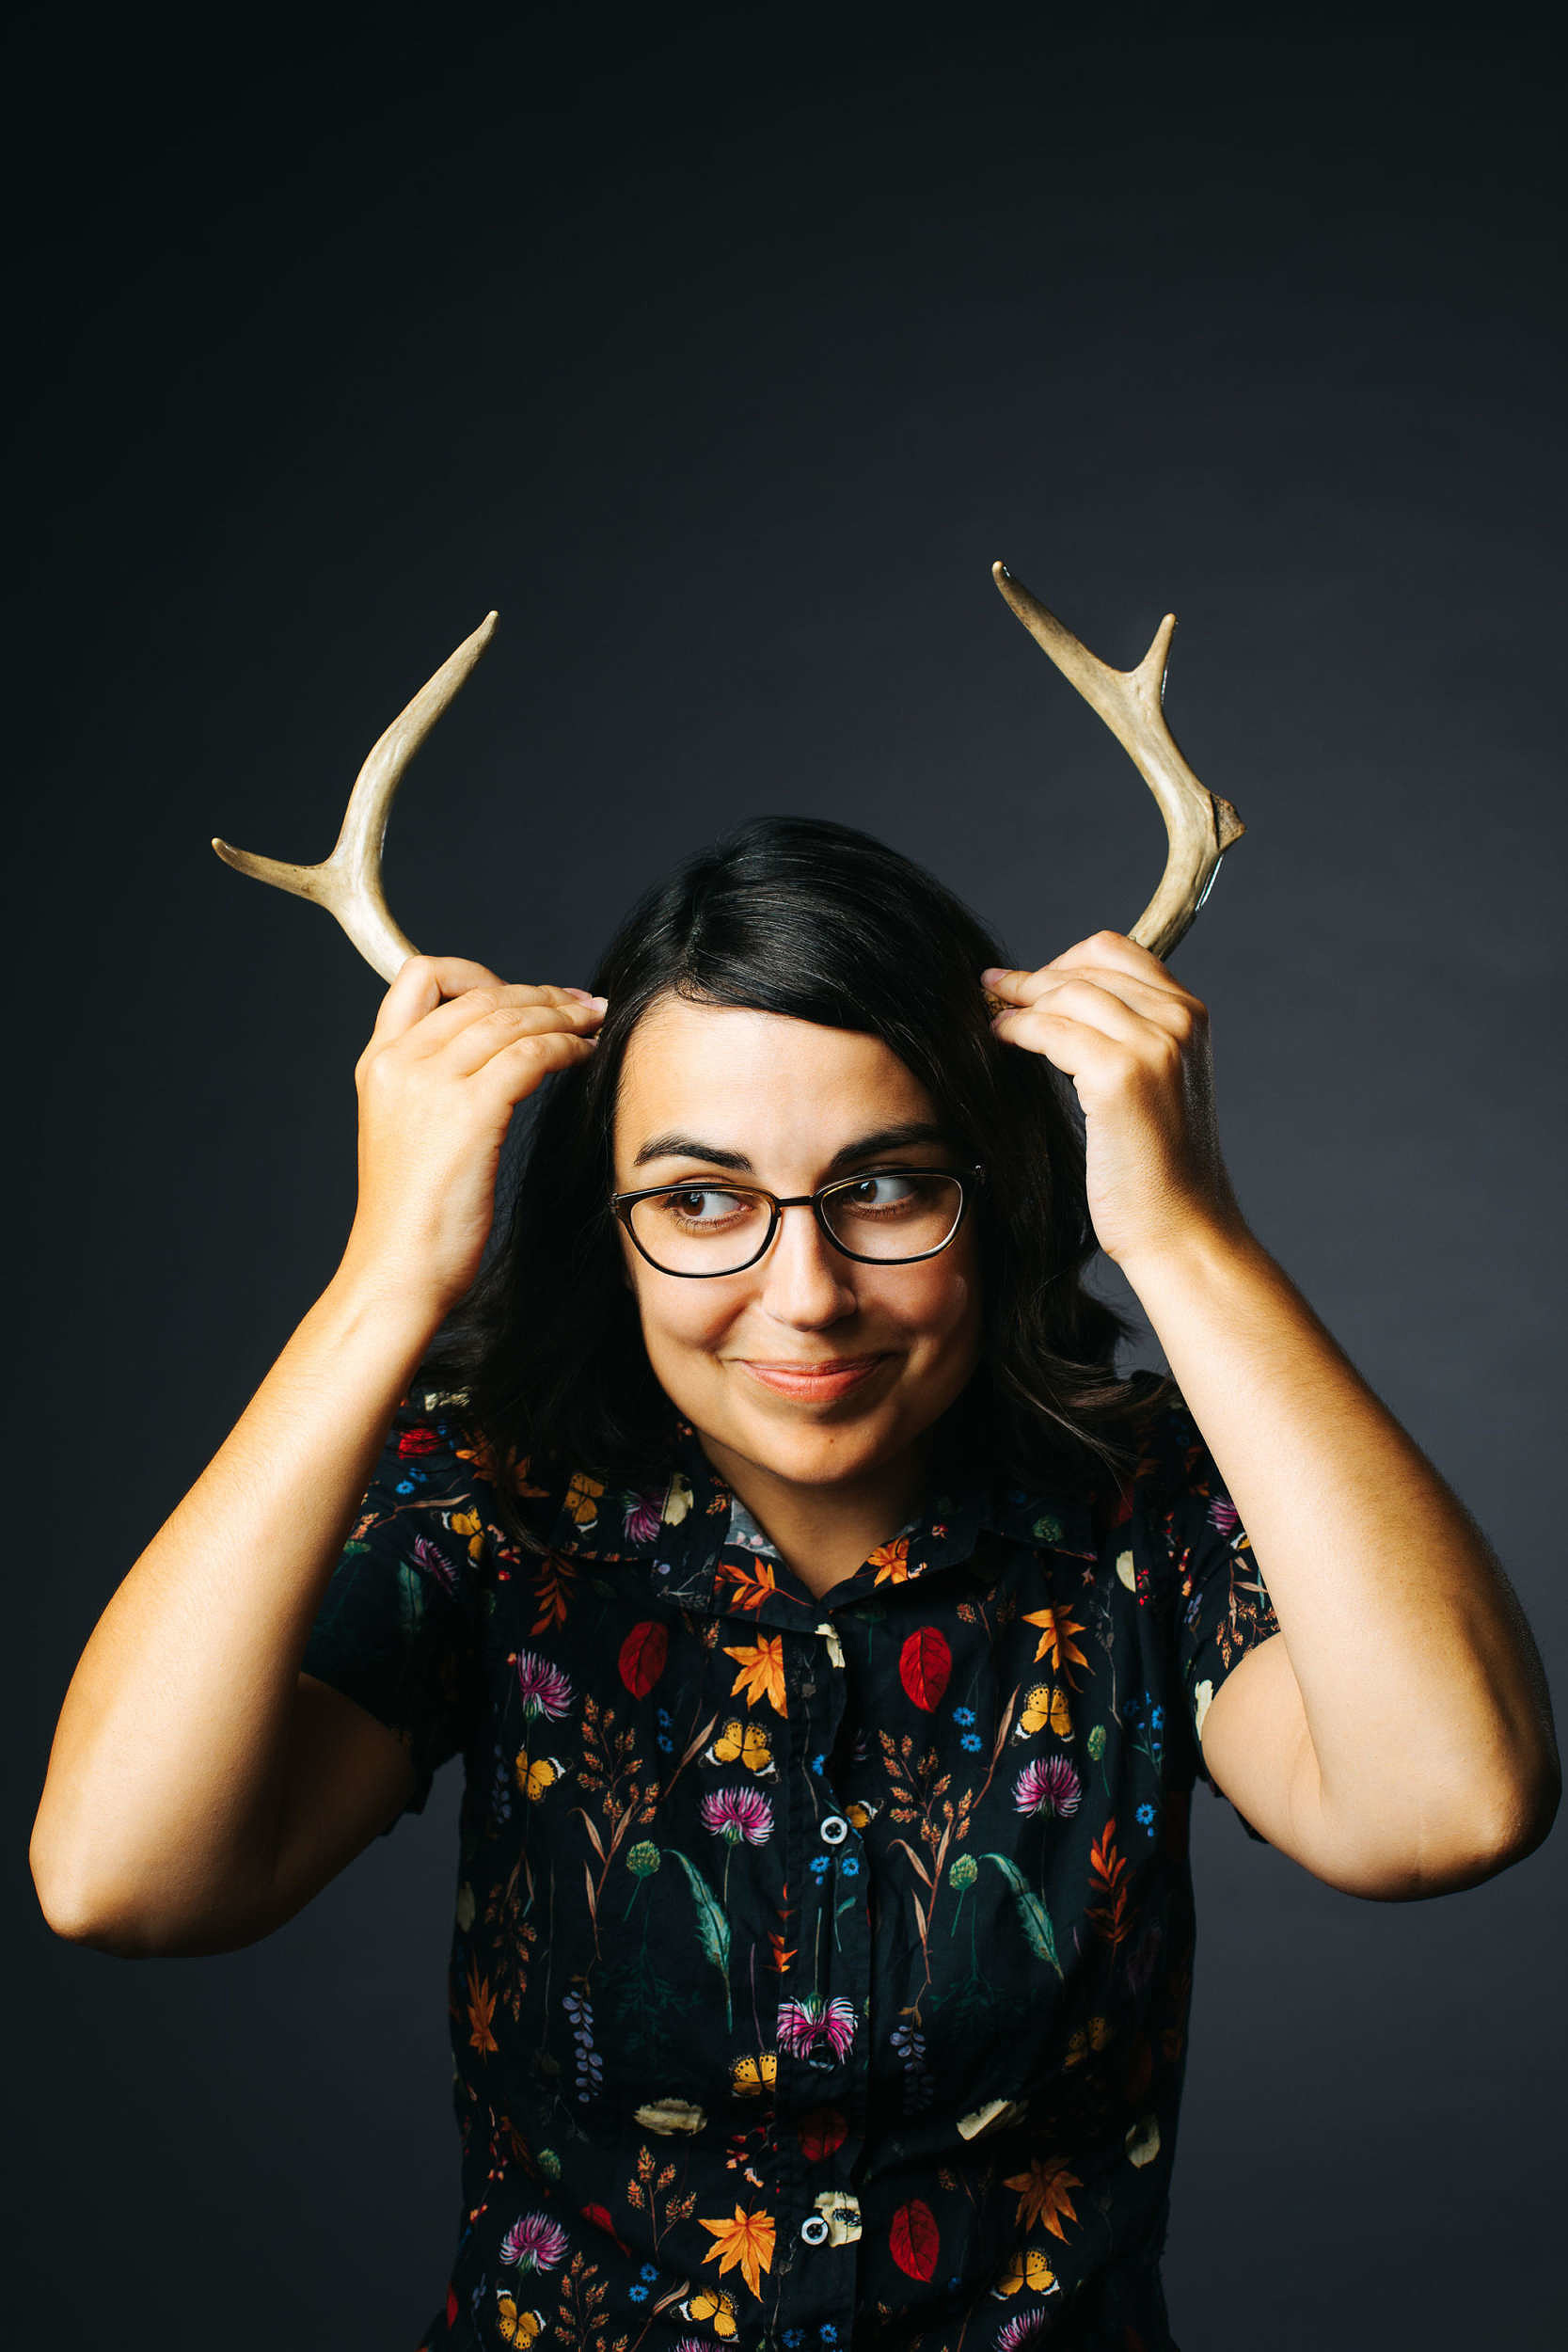 A photo of cartoonist Rosemary Mosco holding antlers up to her head. (photo © Rosemary Mosco)